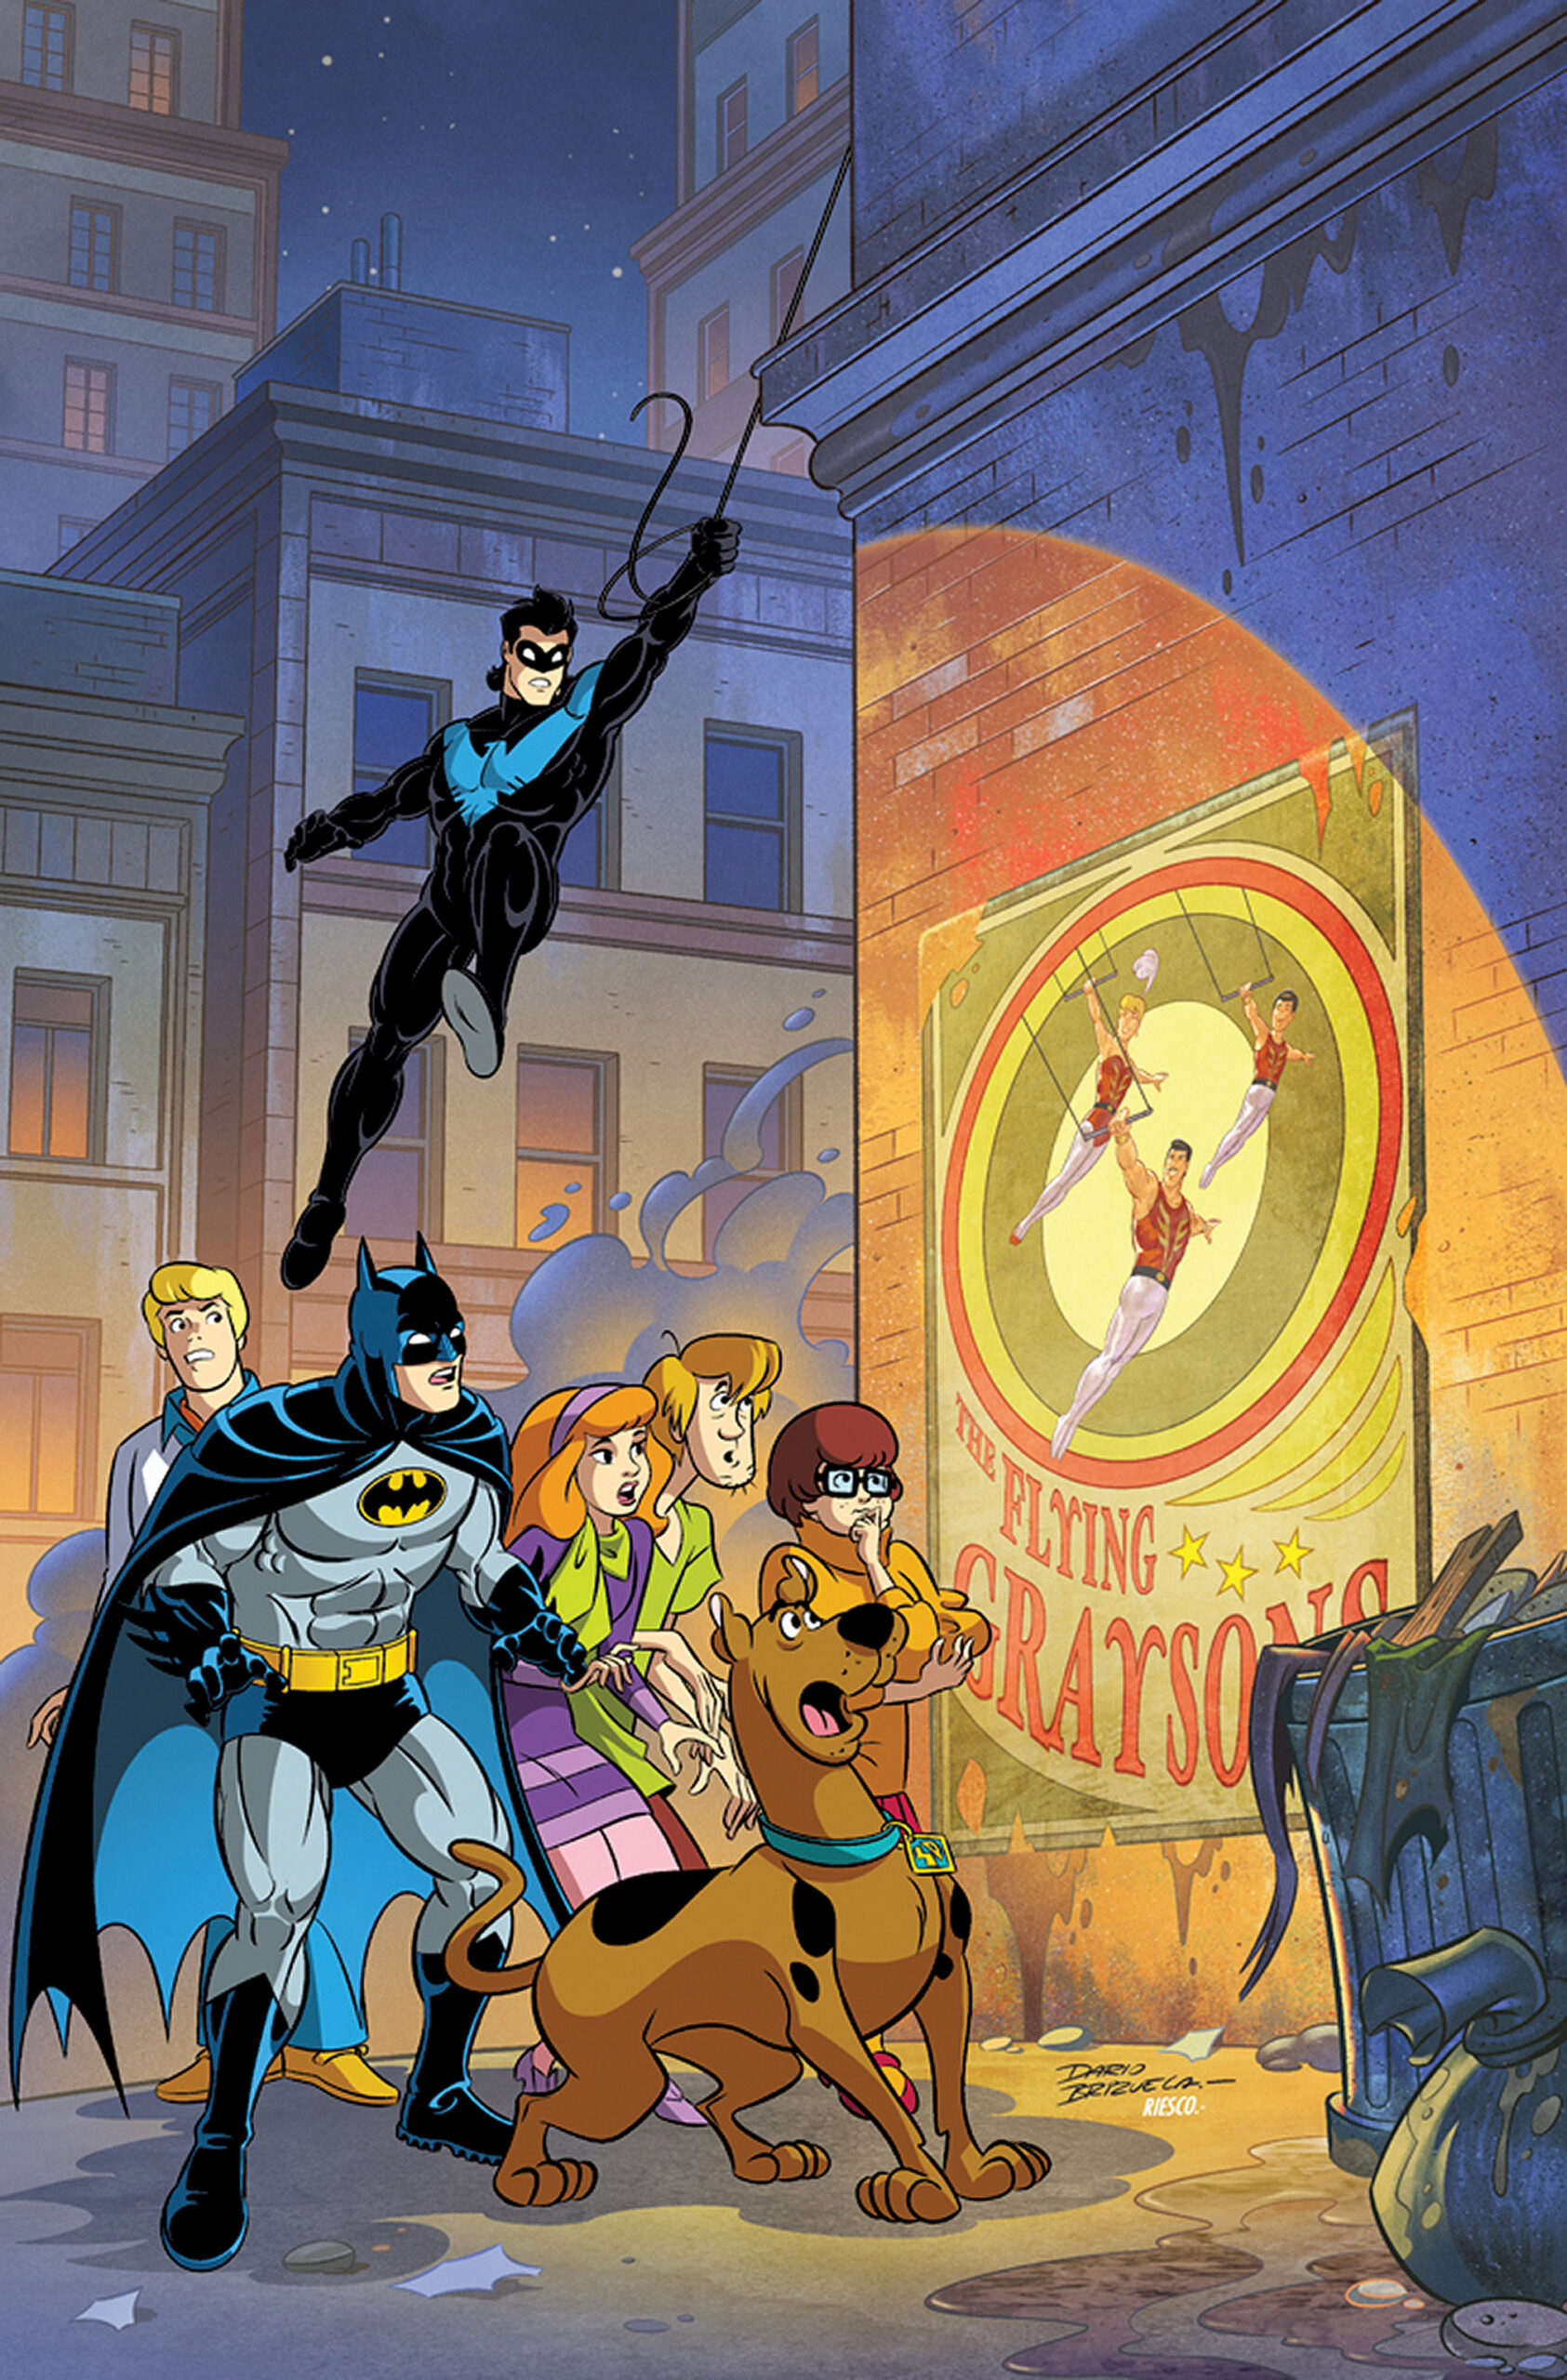 ZOINKS! BATMAN & SCOOBYDOO MYSTERIES Returns for a Third Series 13th